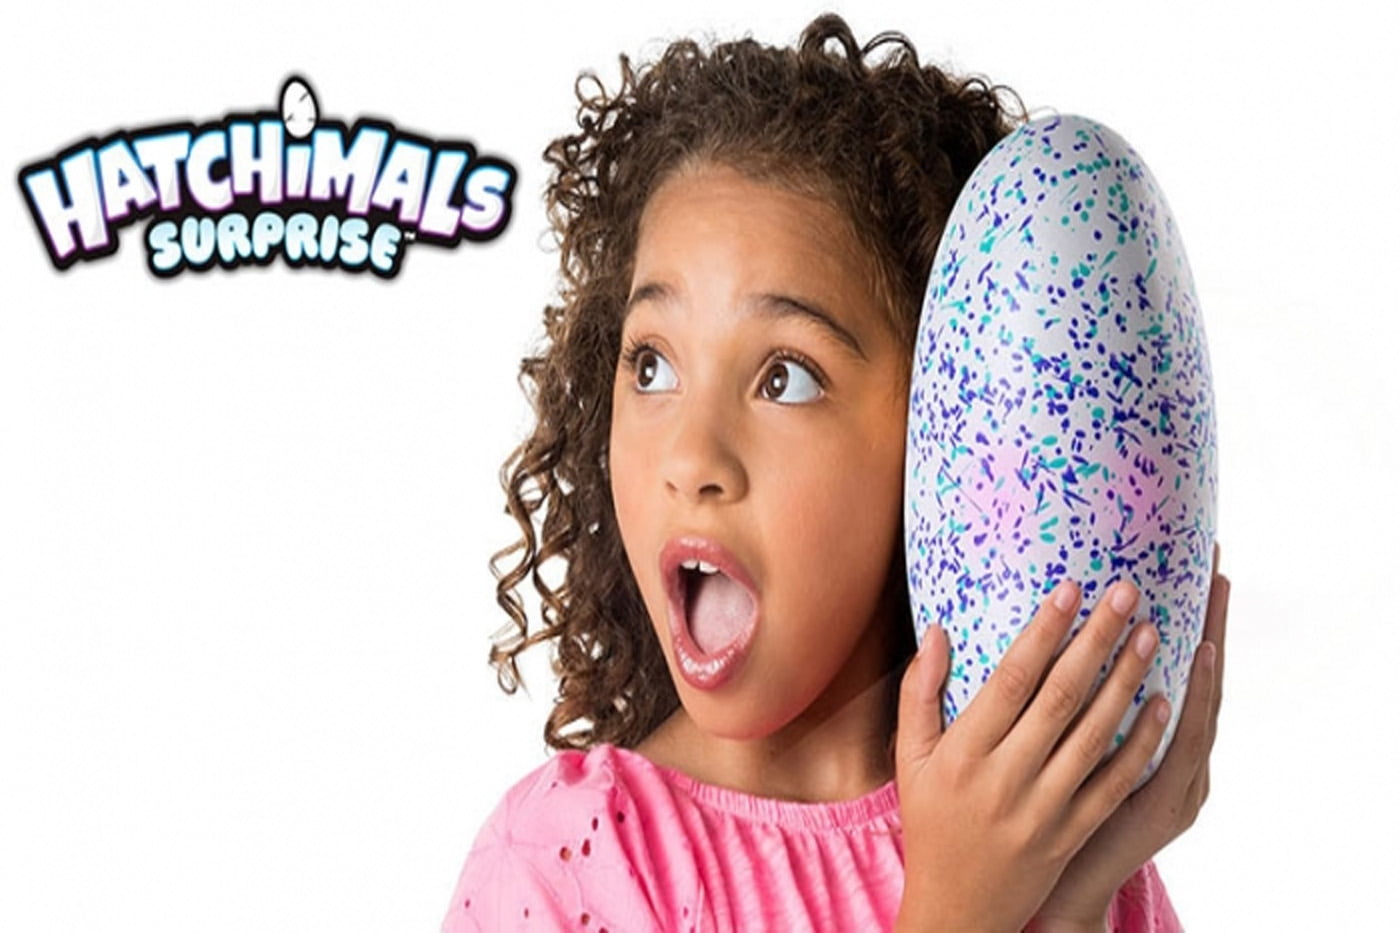 Want to Win a Hatchimals Surprise Toy?